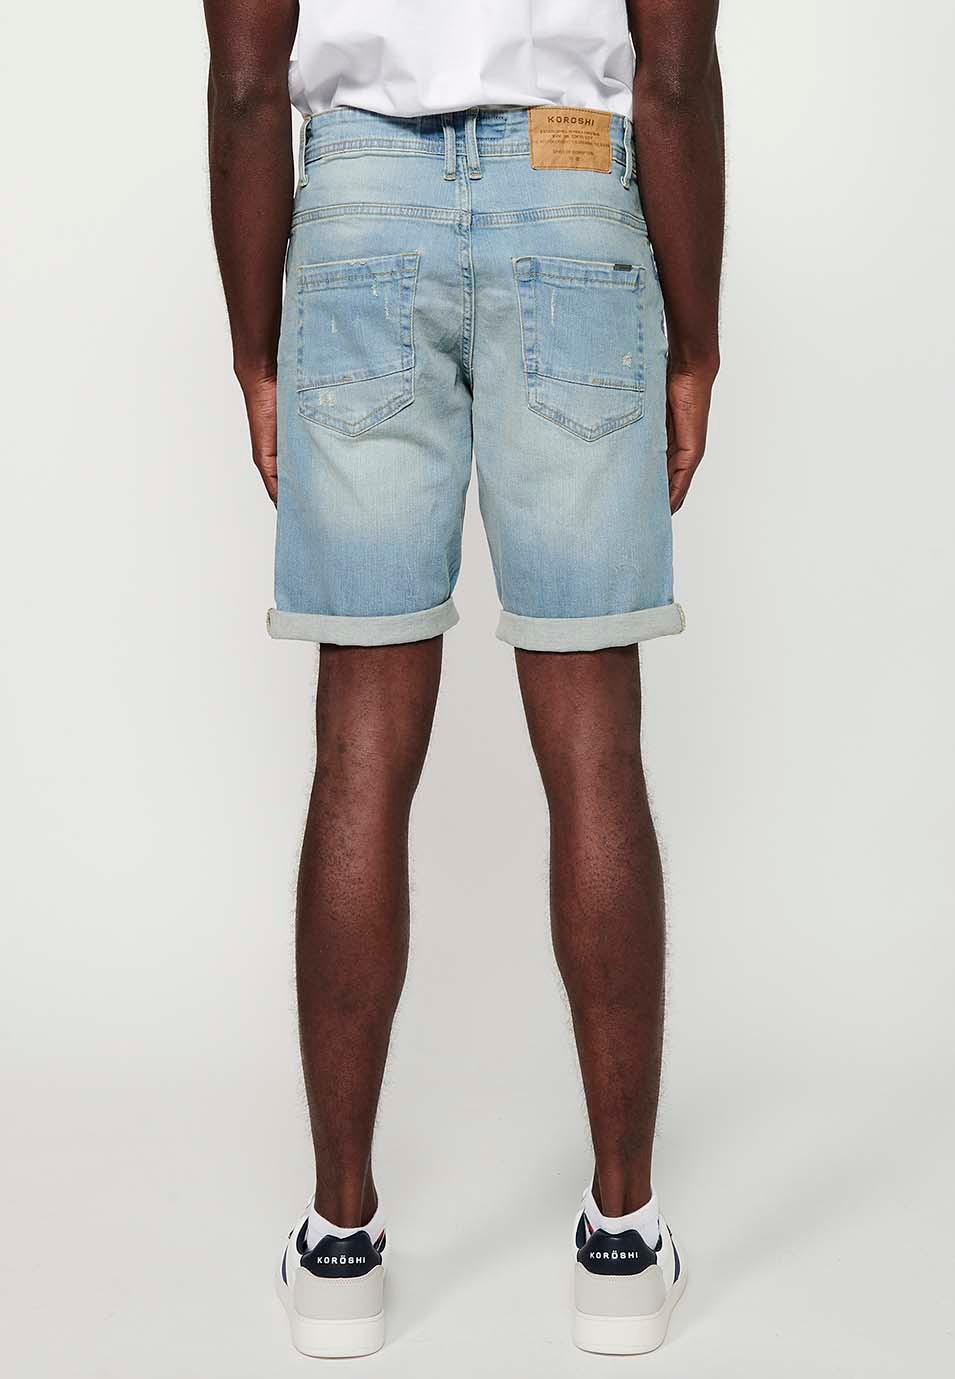 Shorts with turn-up finish and front closure with zipper and button and five pockets, one blue pocket pocket for men 2